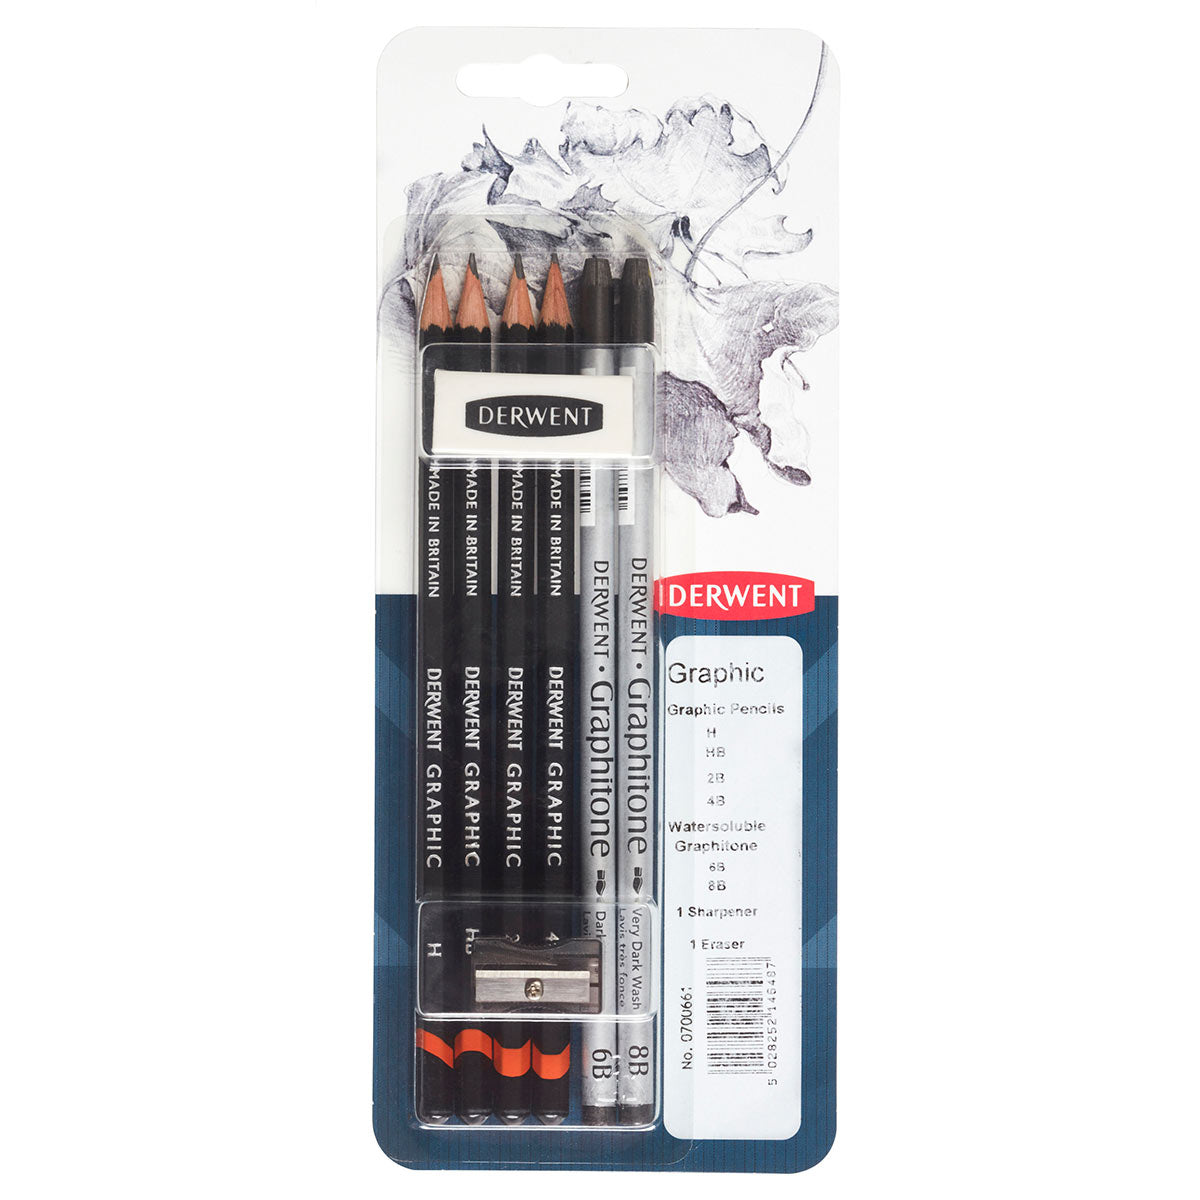 Derwent - Mixed Media Blister 8 Pack - Graphic Pencil set